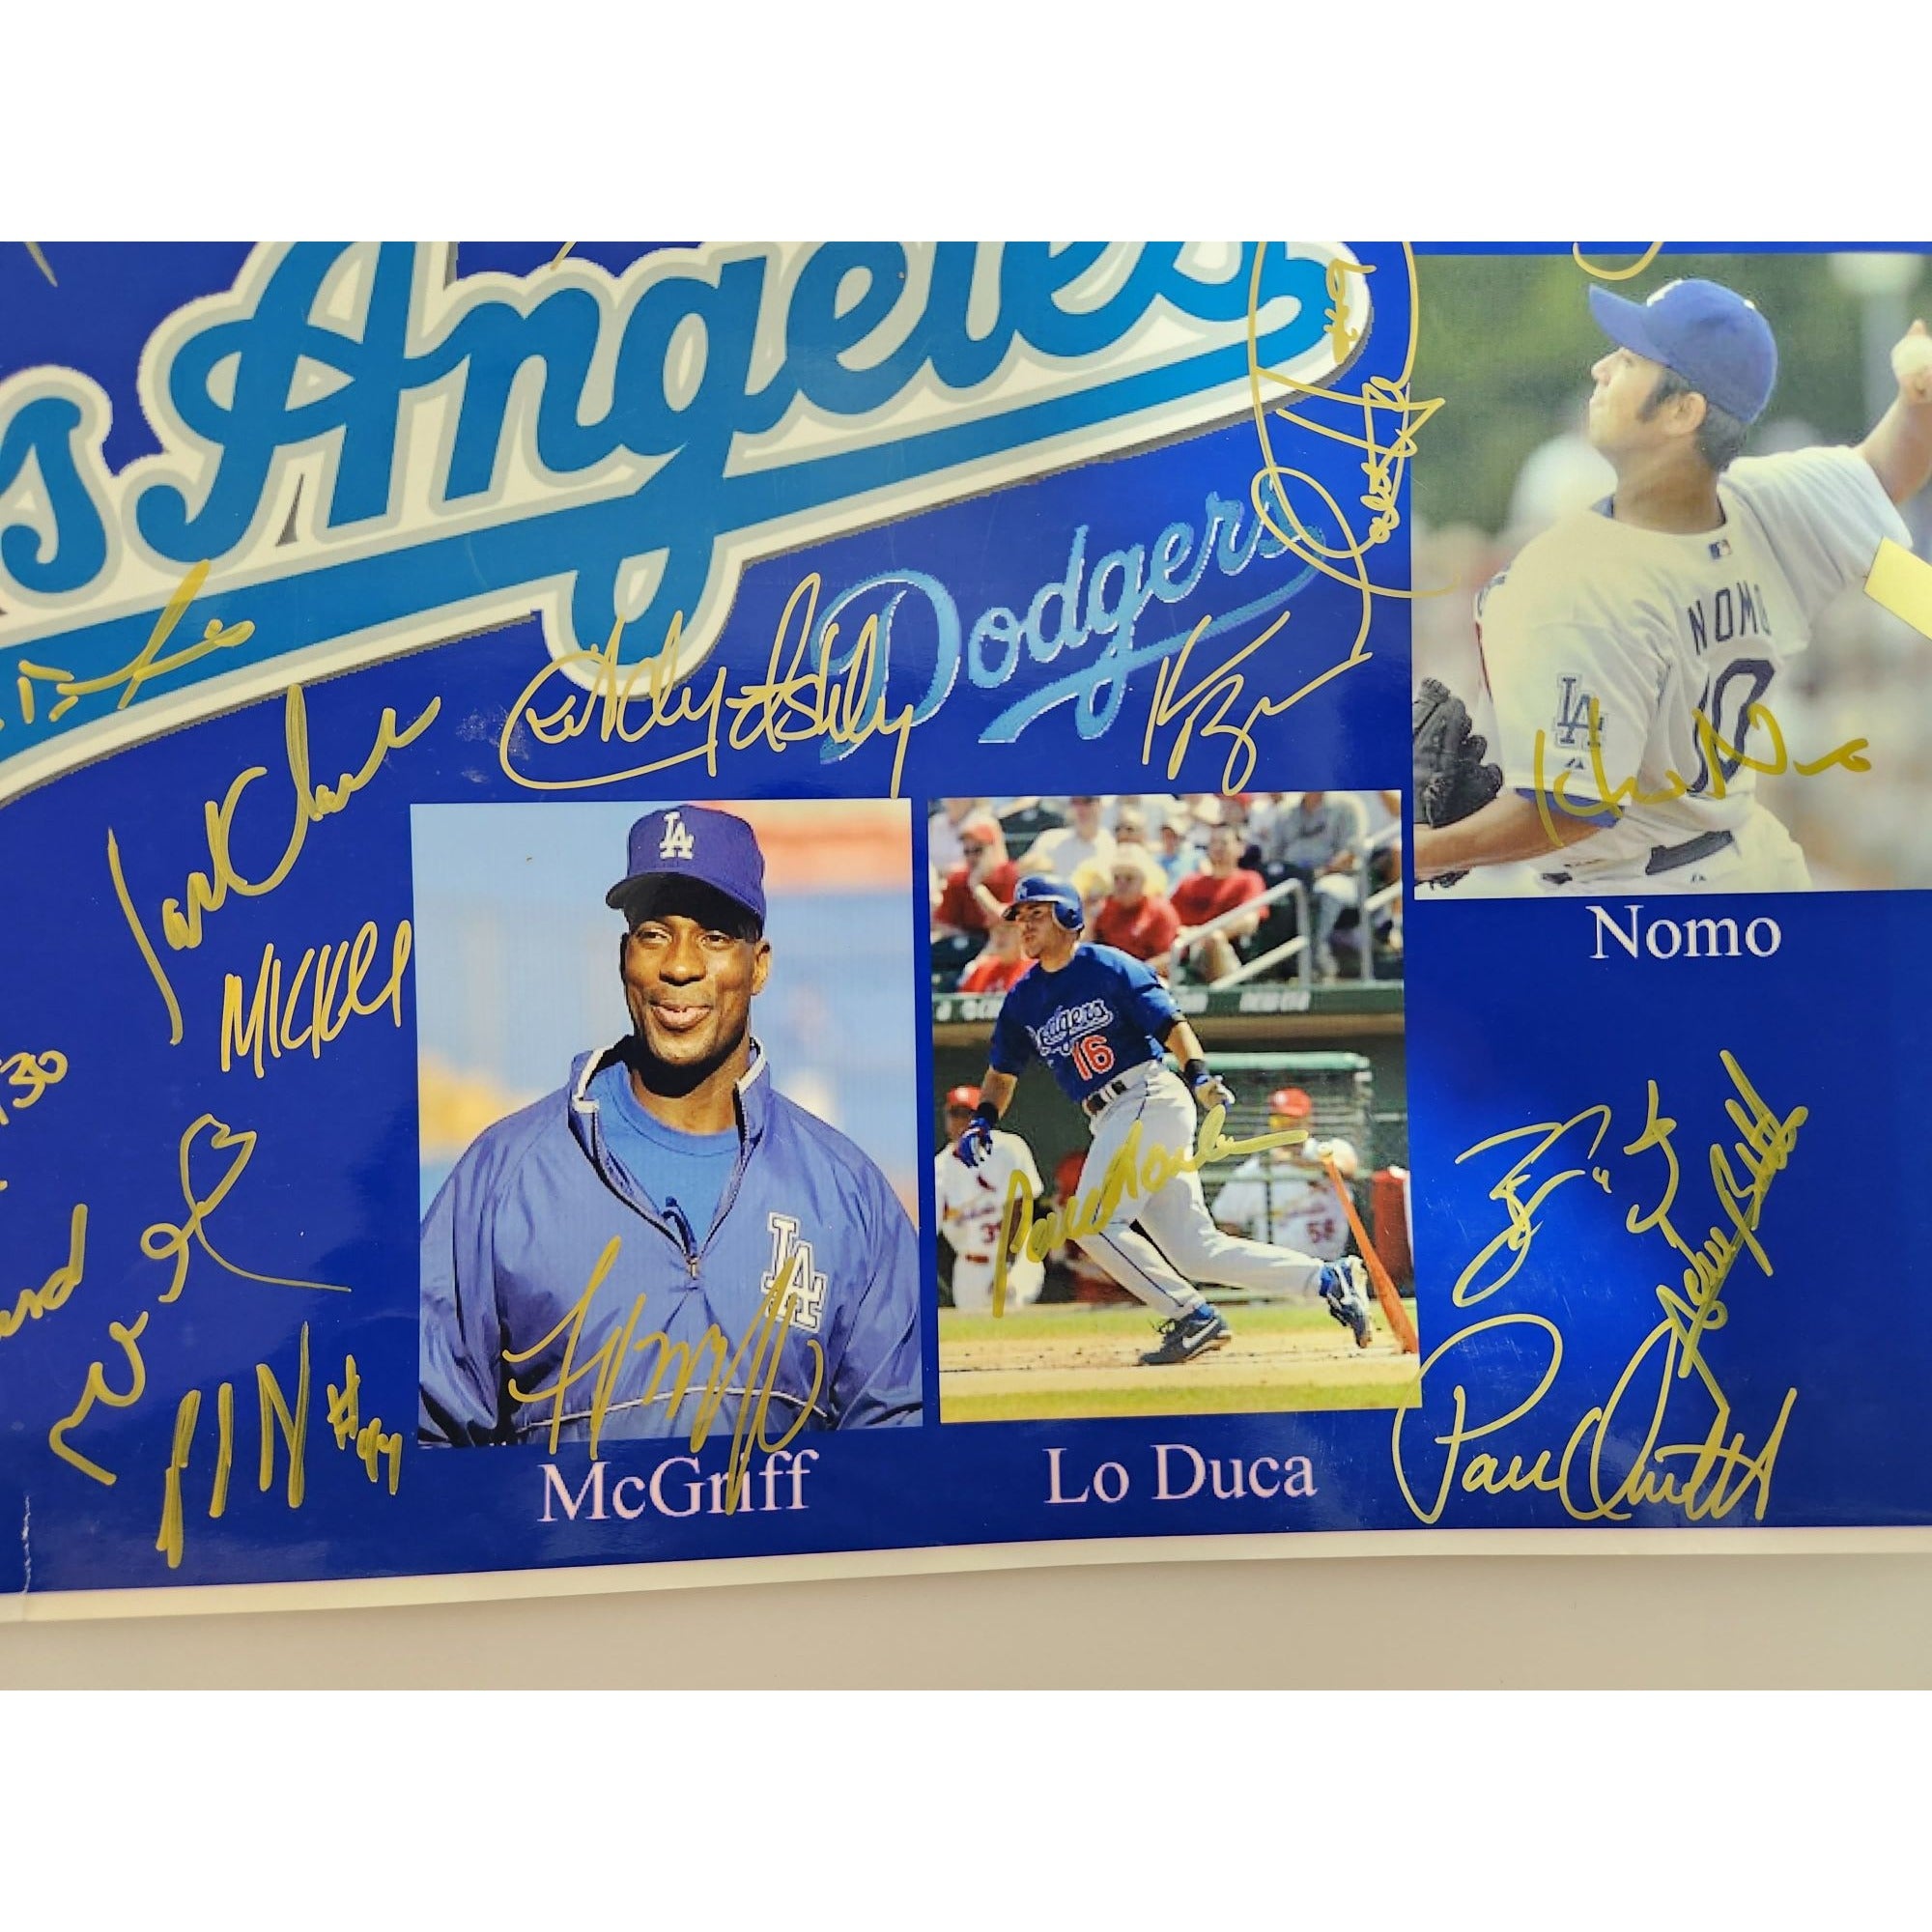 Los Angeles Dodgers Fred McGriff Adrian Beltre Hideo Nomo Eric Gagne 2003 team signed 13x19 photo